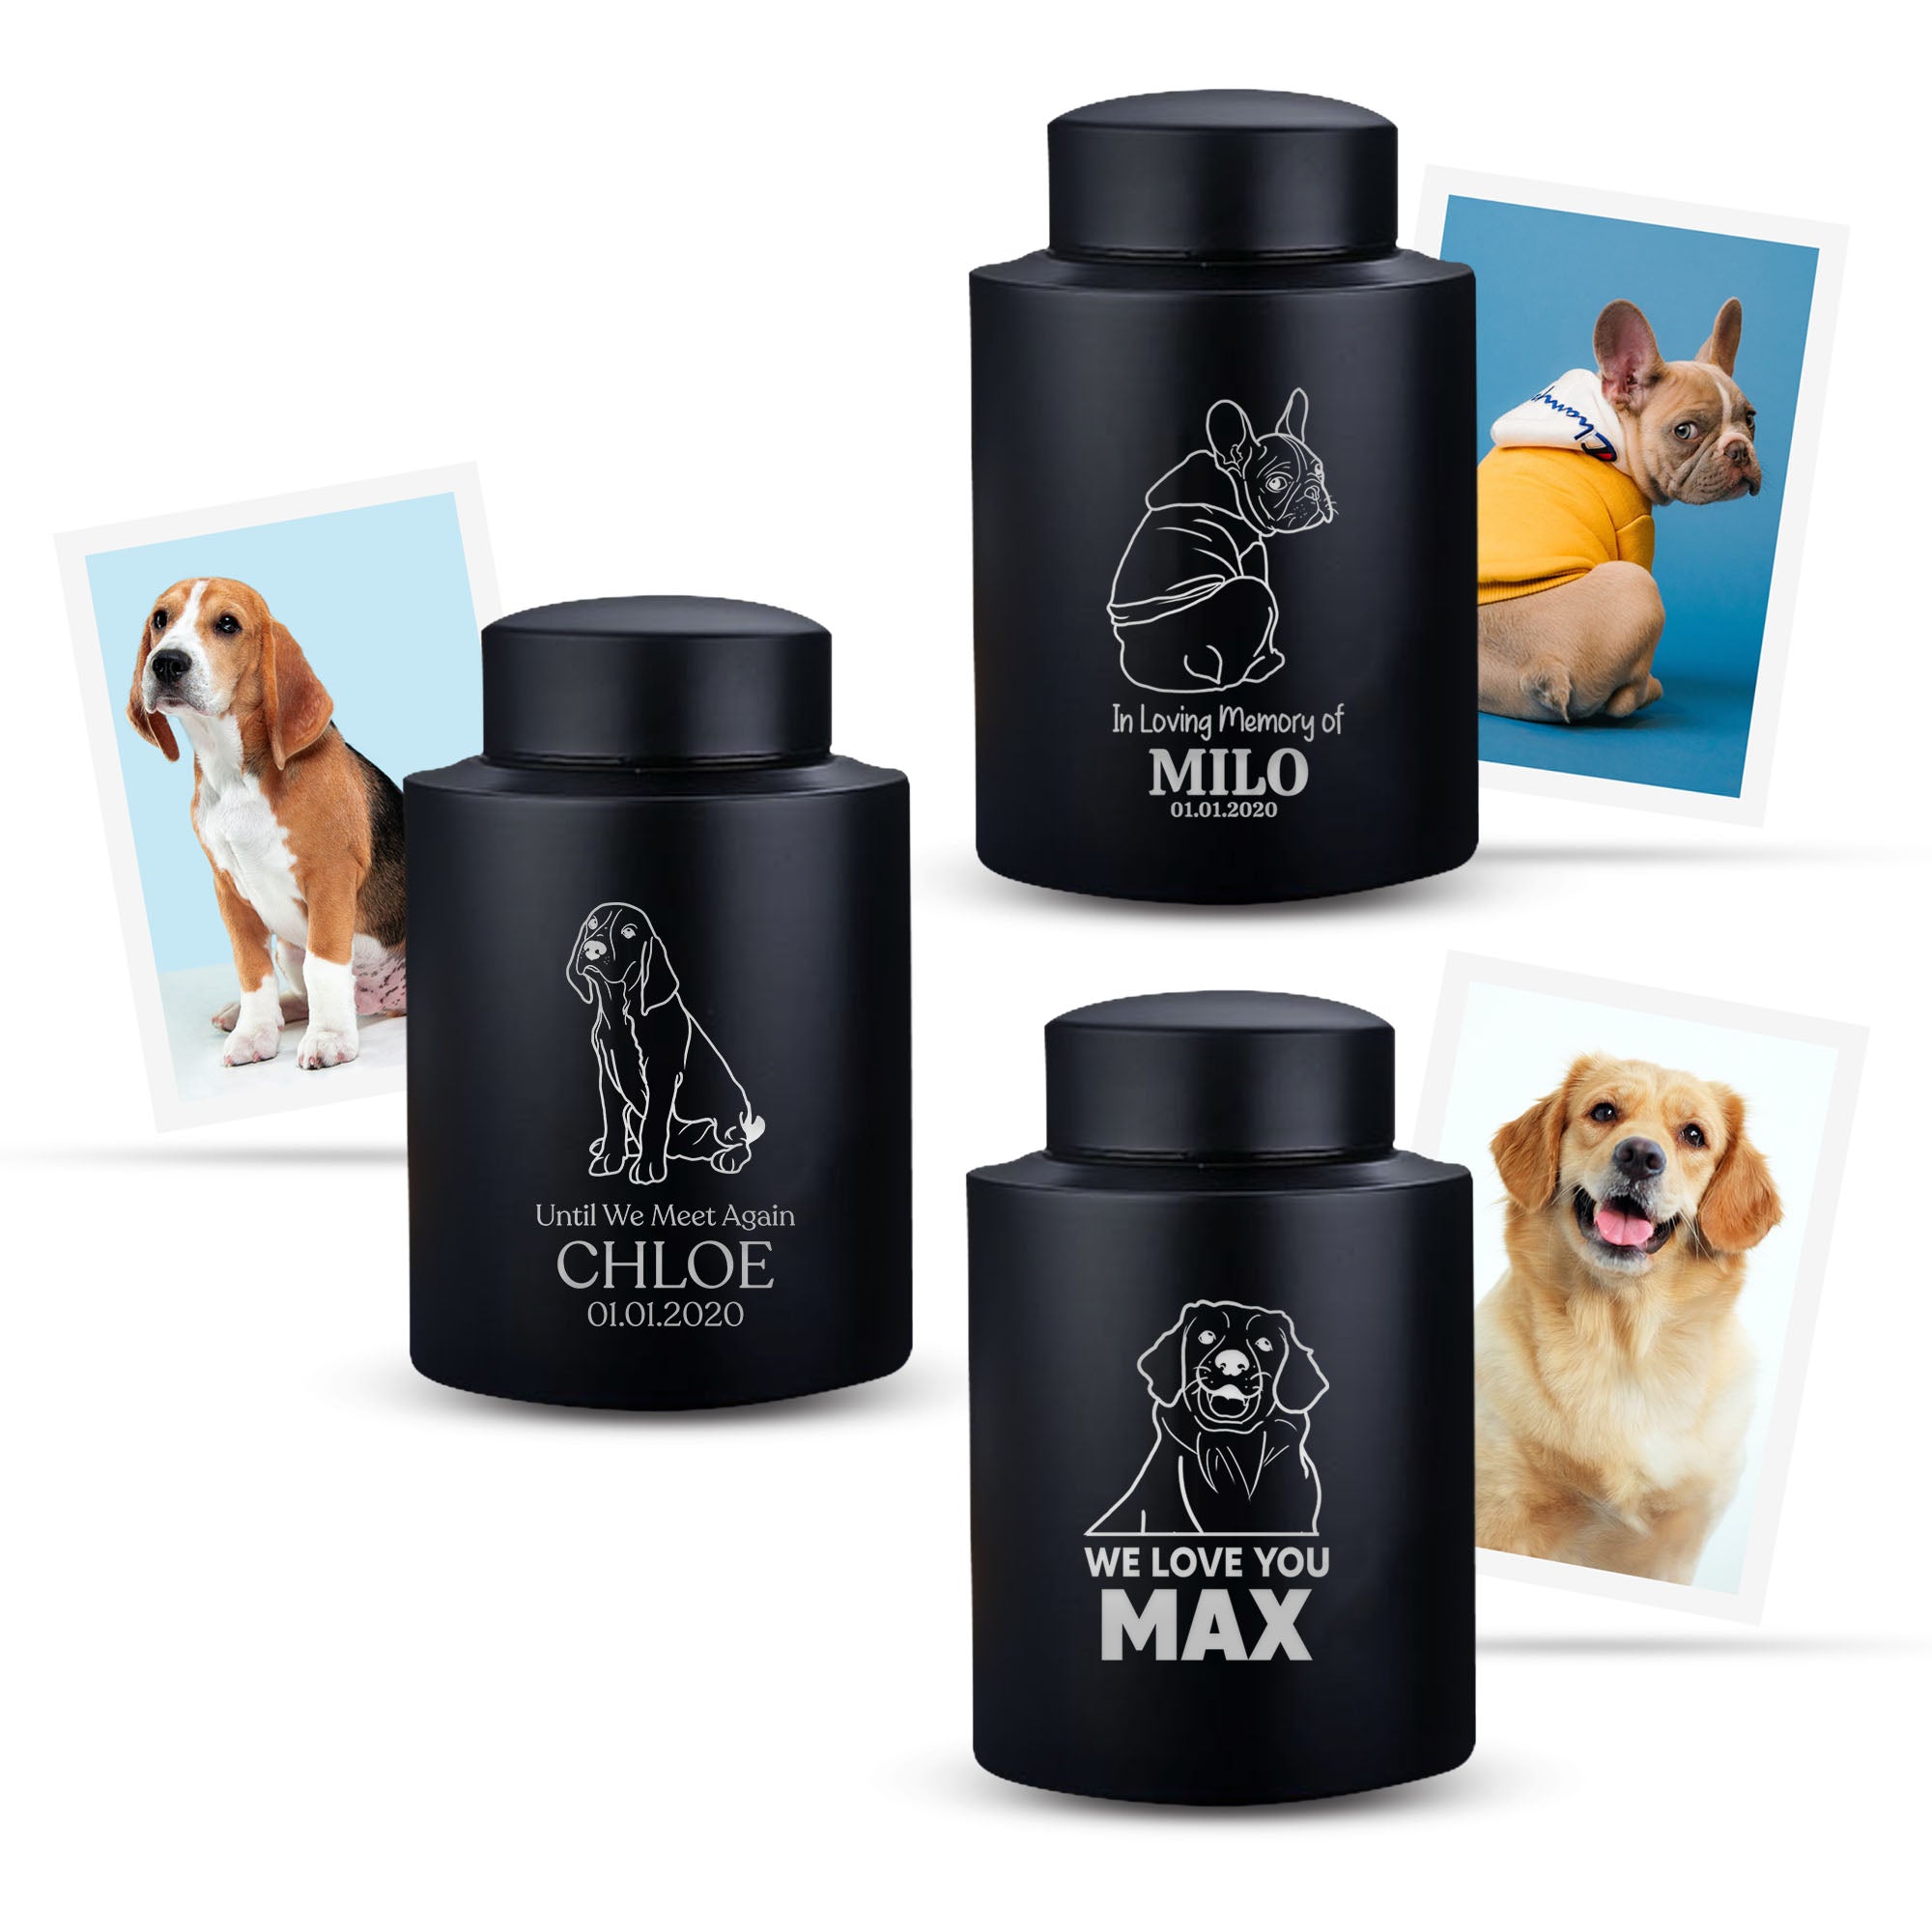 Custom Engraved Pet Photo/Image Cremation Urn – Personalized Pet Image Round Powder Coated Steel Standard Size Urn for Pet, Name, Date, and Text Engraving Included | Pet Size 30-50 lbs | Black